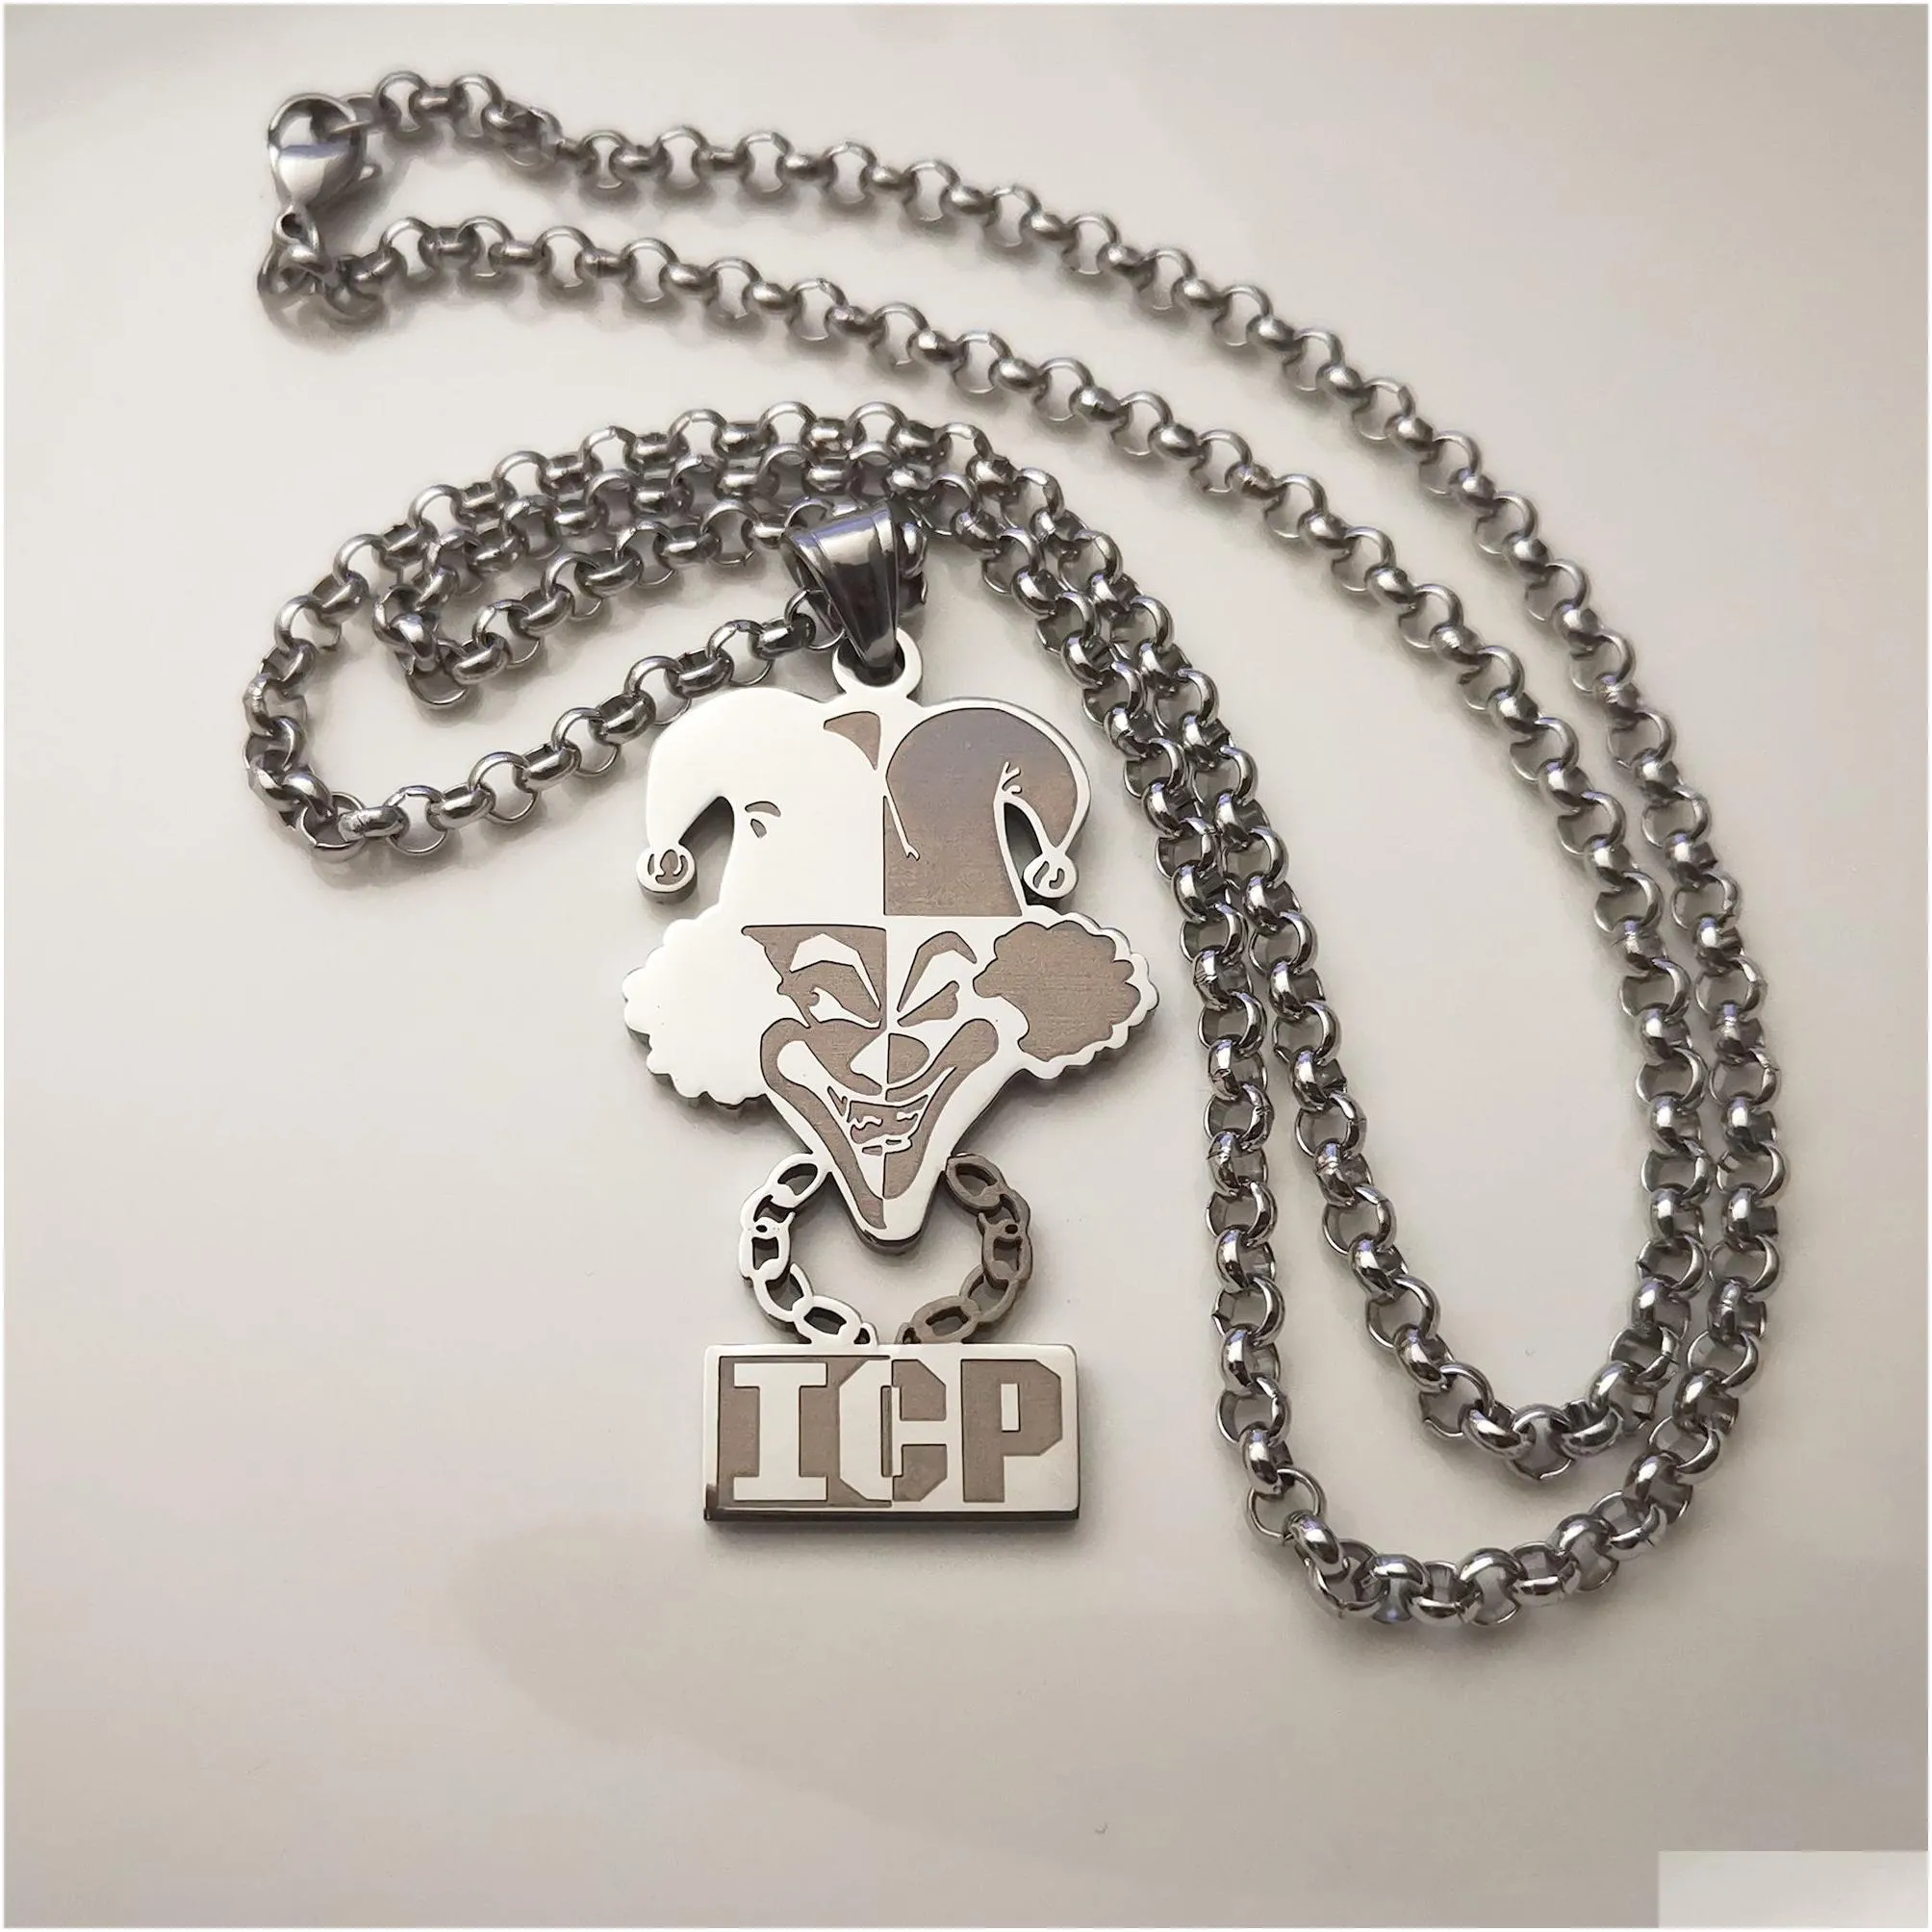 High Polished Silver Stainless Steel ICP CLOWN TWIZTID PENDANT CHARM NECKLACE 4mm 24INCH Rolo CHAIN Jugallo for Mens238Z